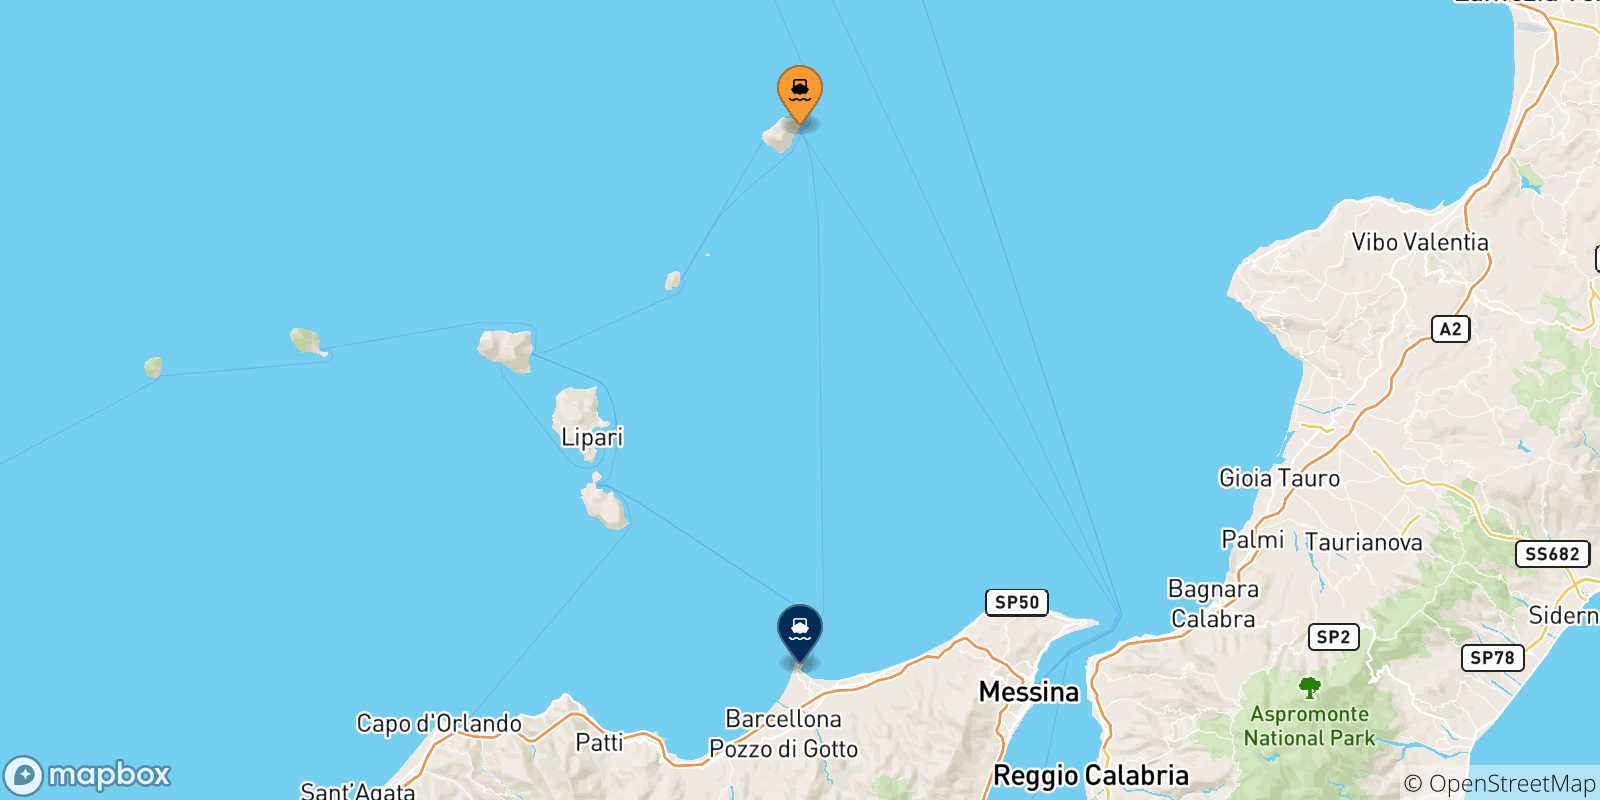 Map of the possible routes between Stromboli and Sicily